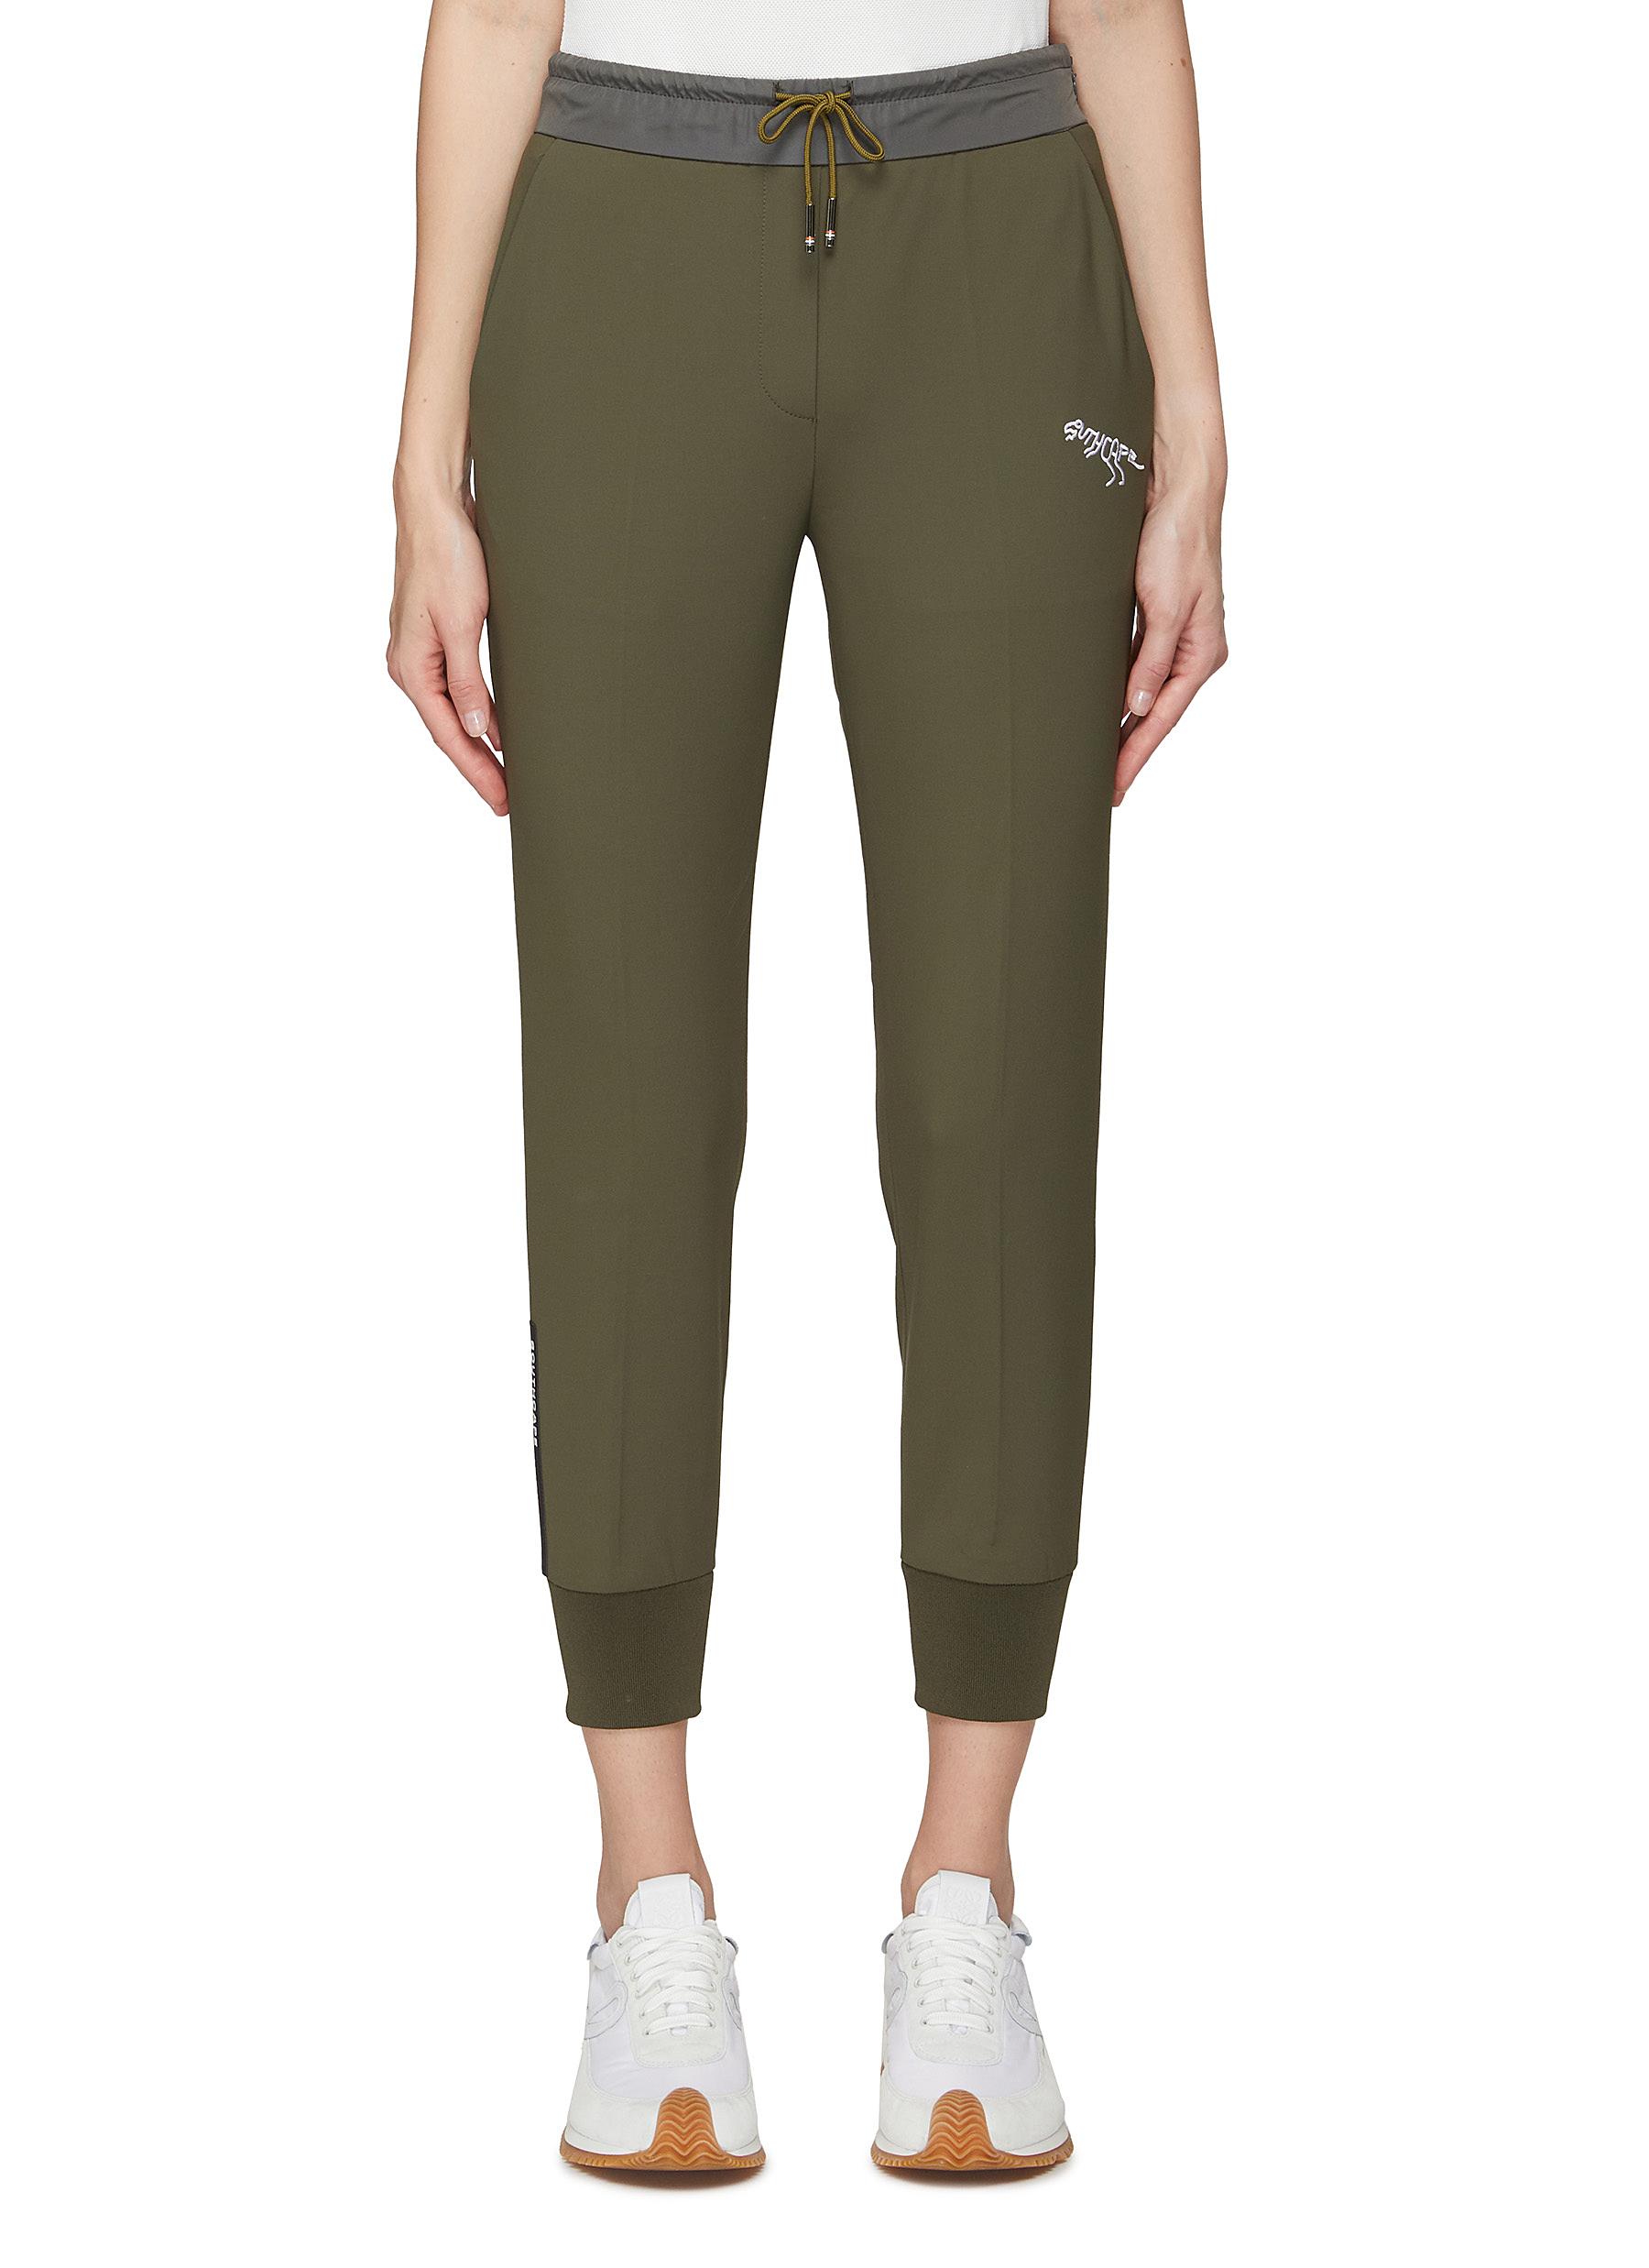 Southcape Elasticated Cuff Drawstring Sweatpants In Green